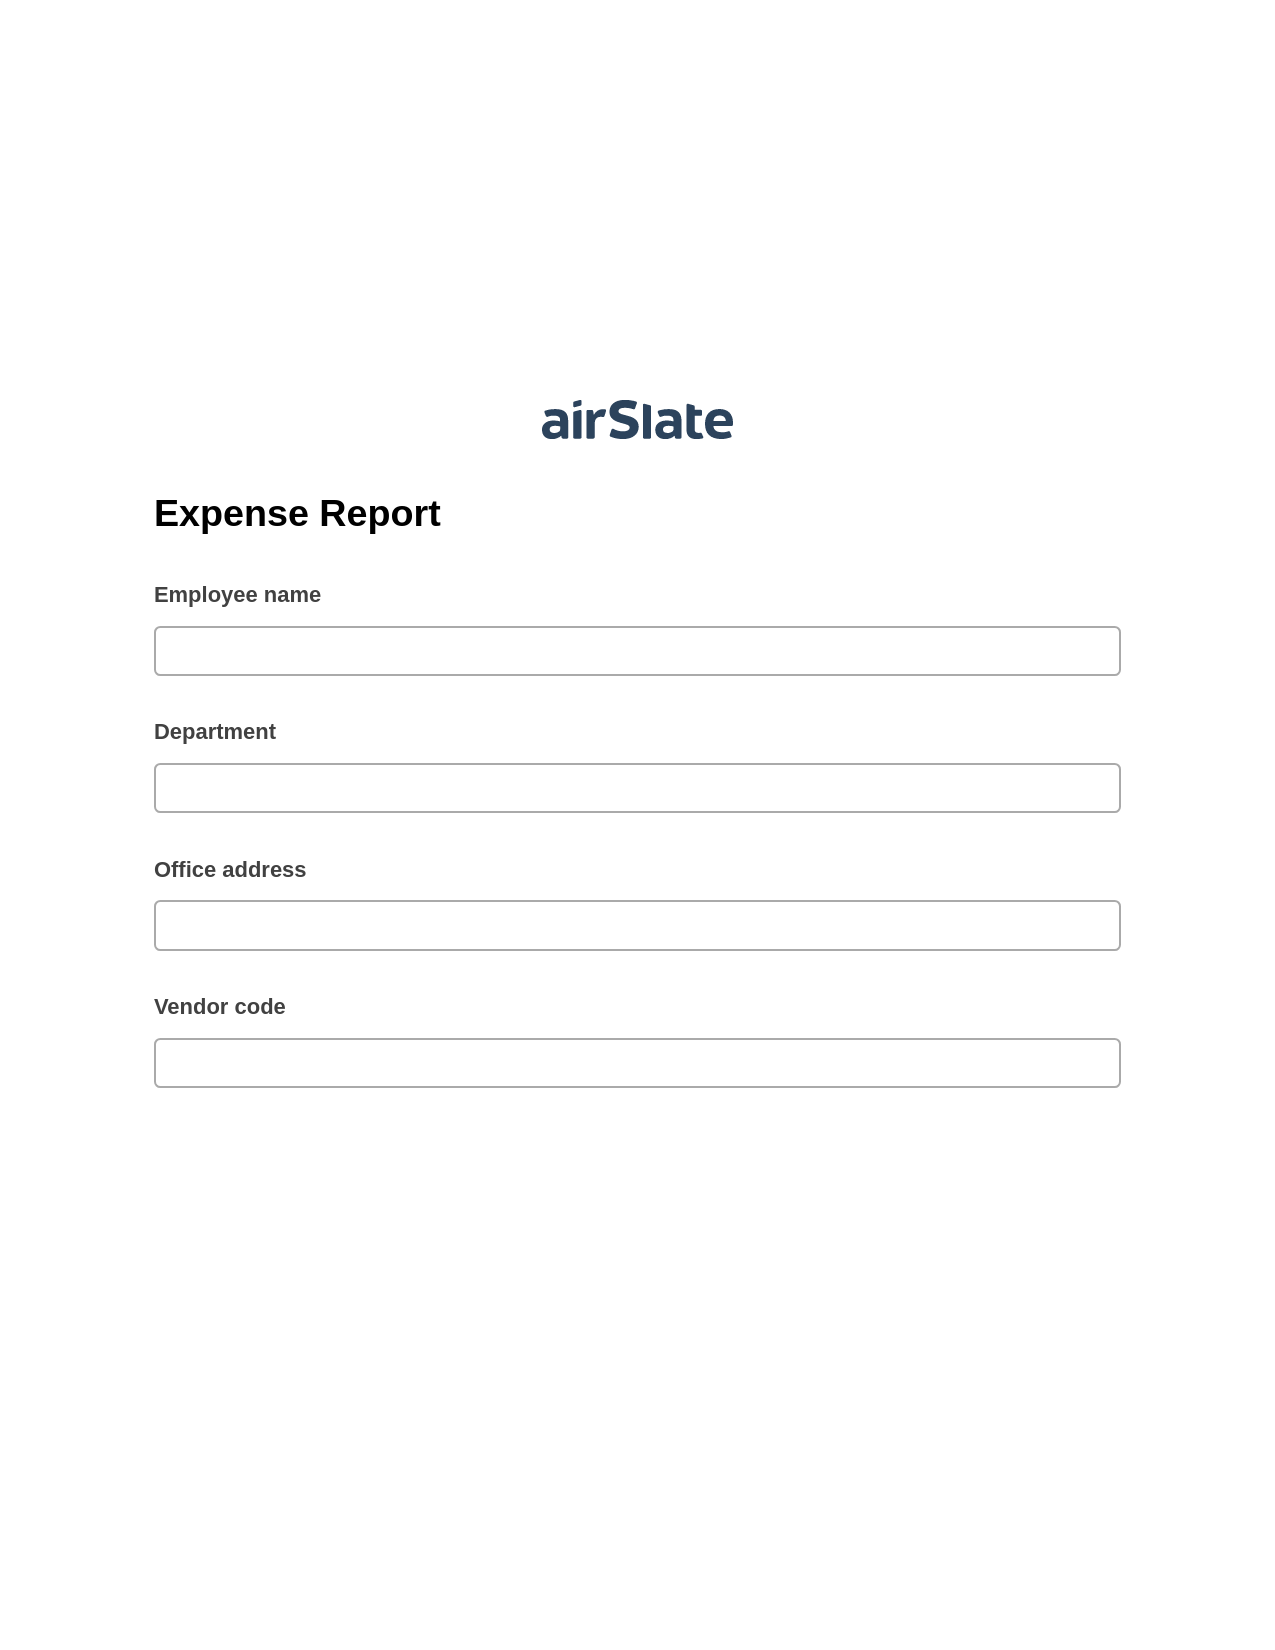 Expense Report Pre-fill Slate from MS Dynamics 365 Records Bot, Webhook Bot, Box Bot